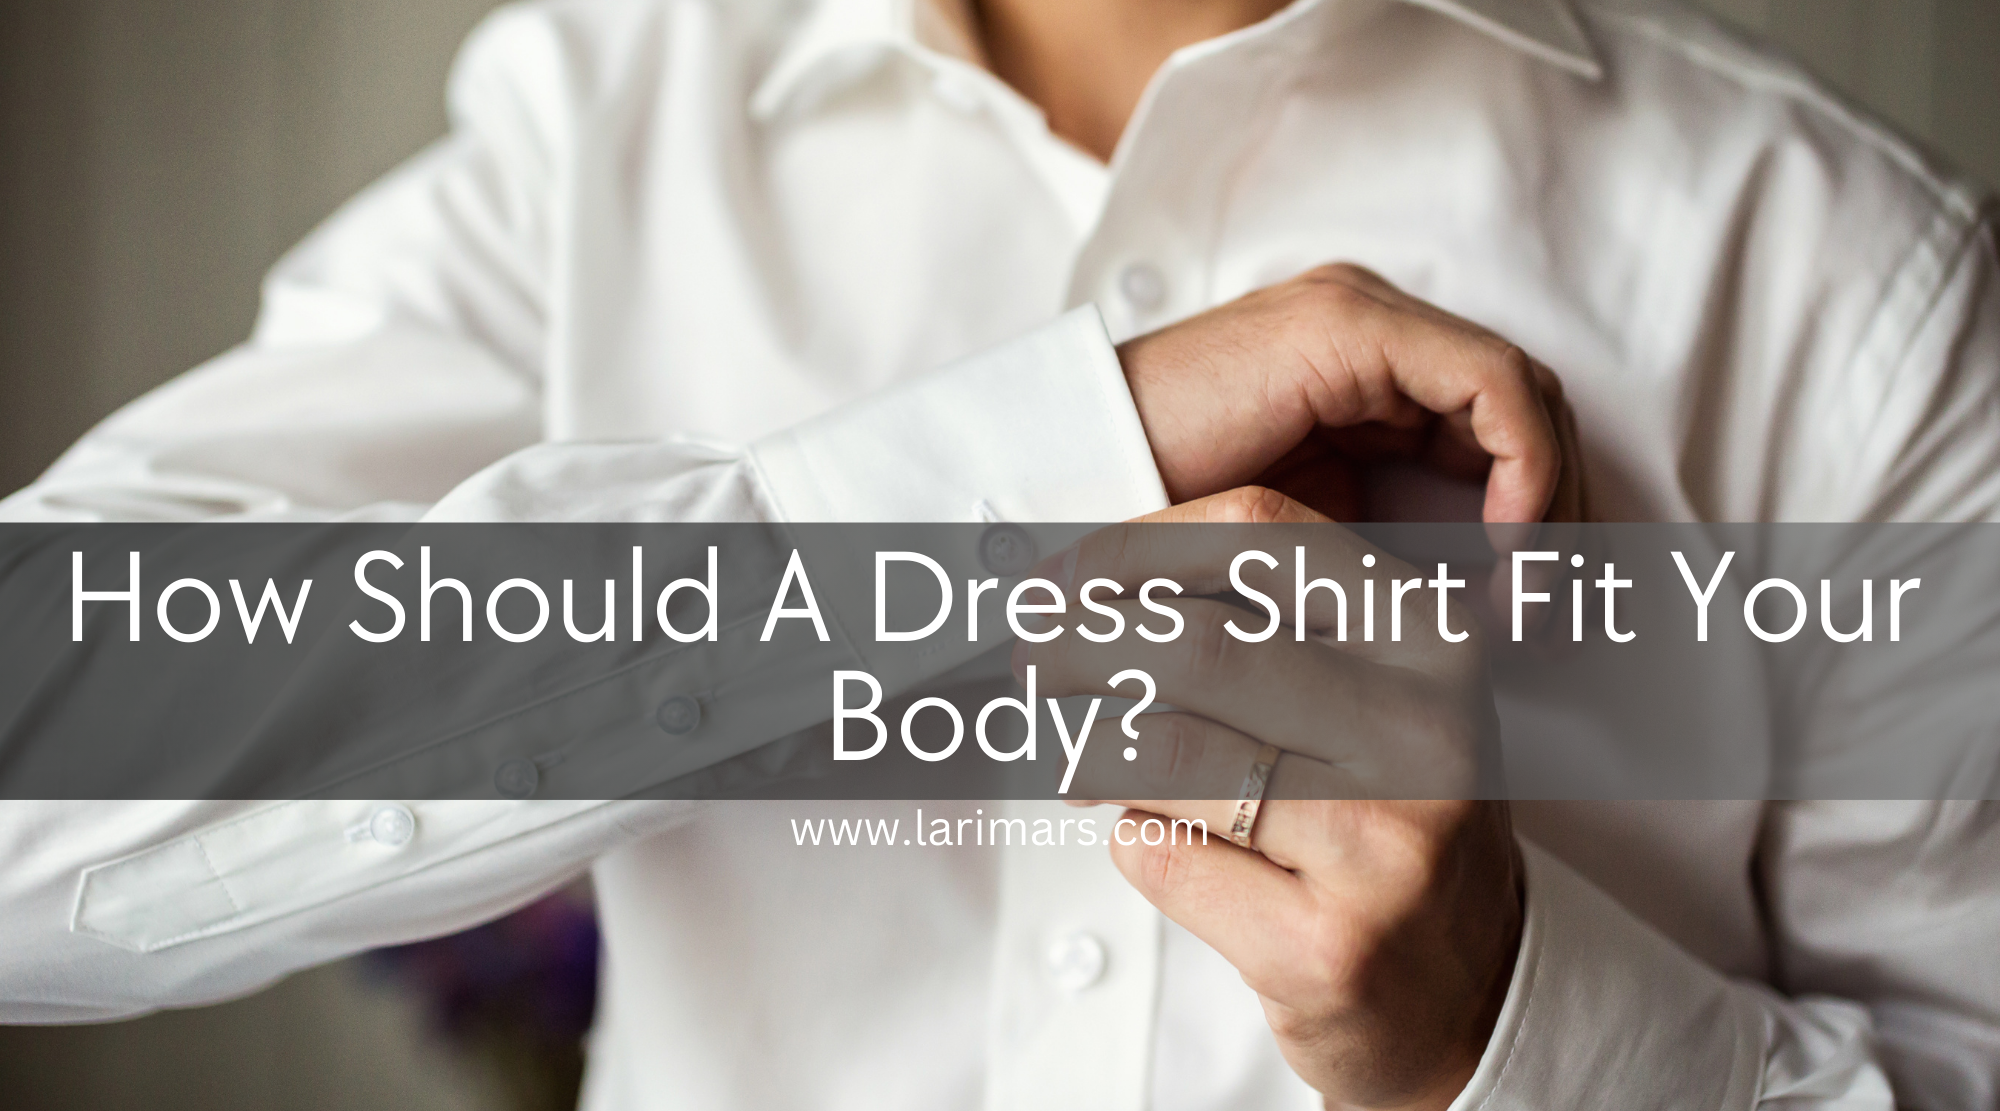 How Should A Dress Shirt Fit Your Body